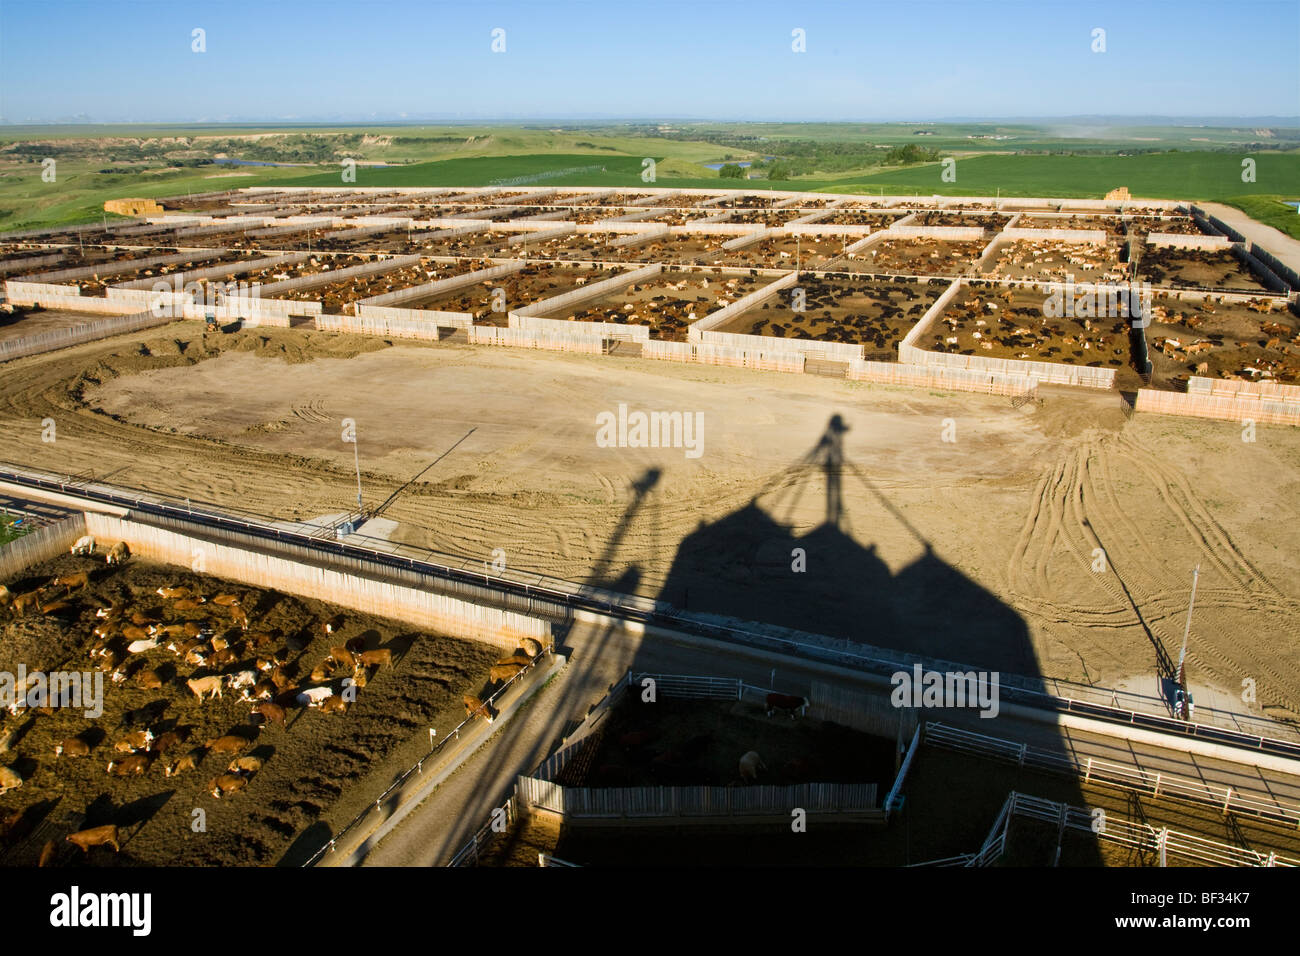 High view of a large modern beef feedlot with 12,500 head capacity with the feed mill shadow in the foreground / Alberta, Canada Stock Photo